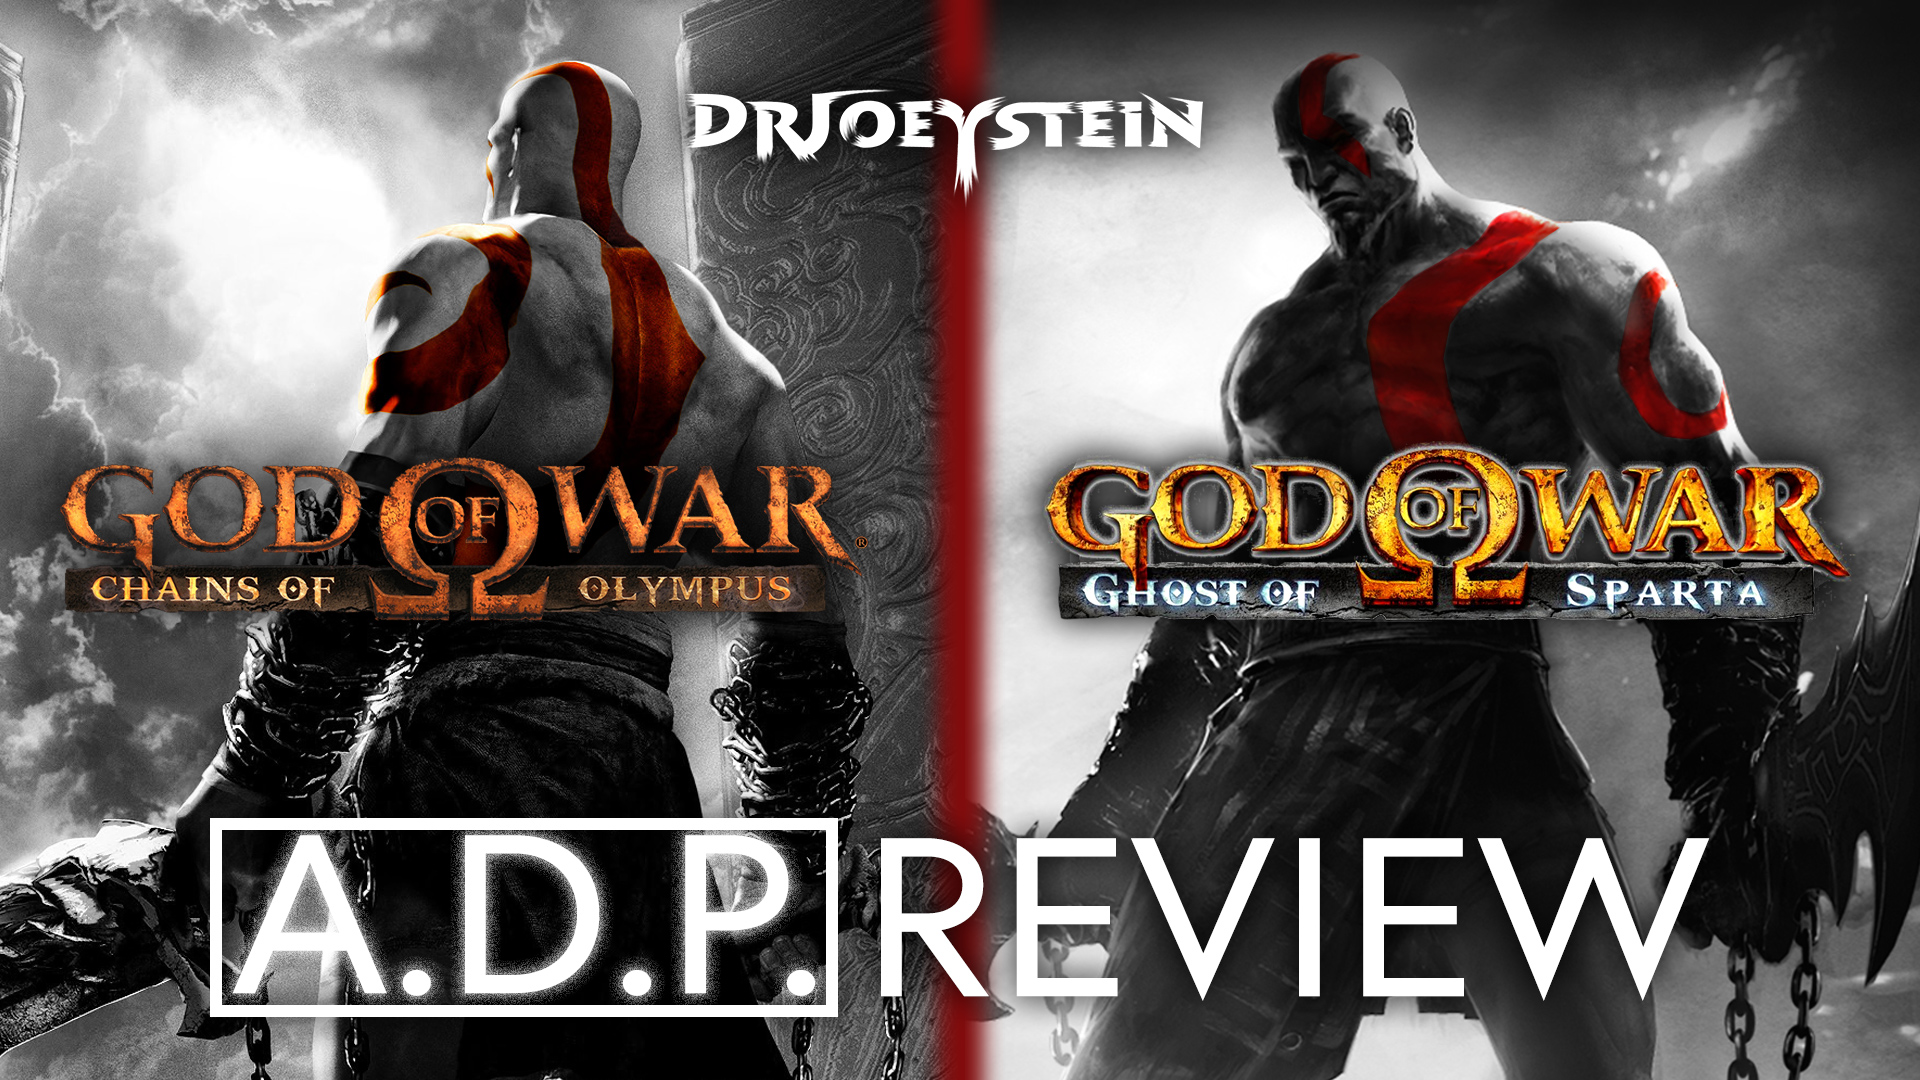 GOD OF WAR CHAINS OF OLYMPUS REMASTERED